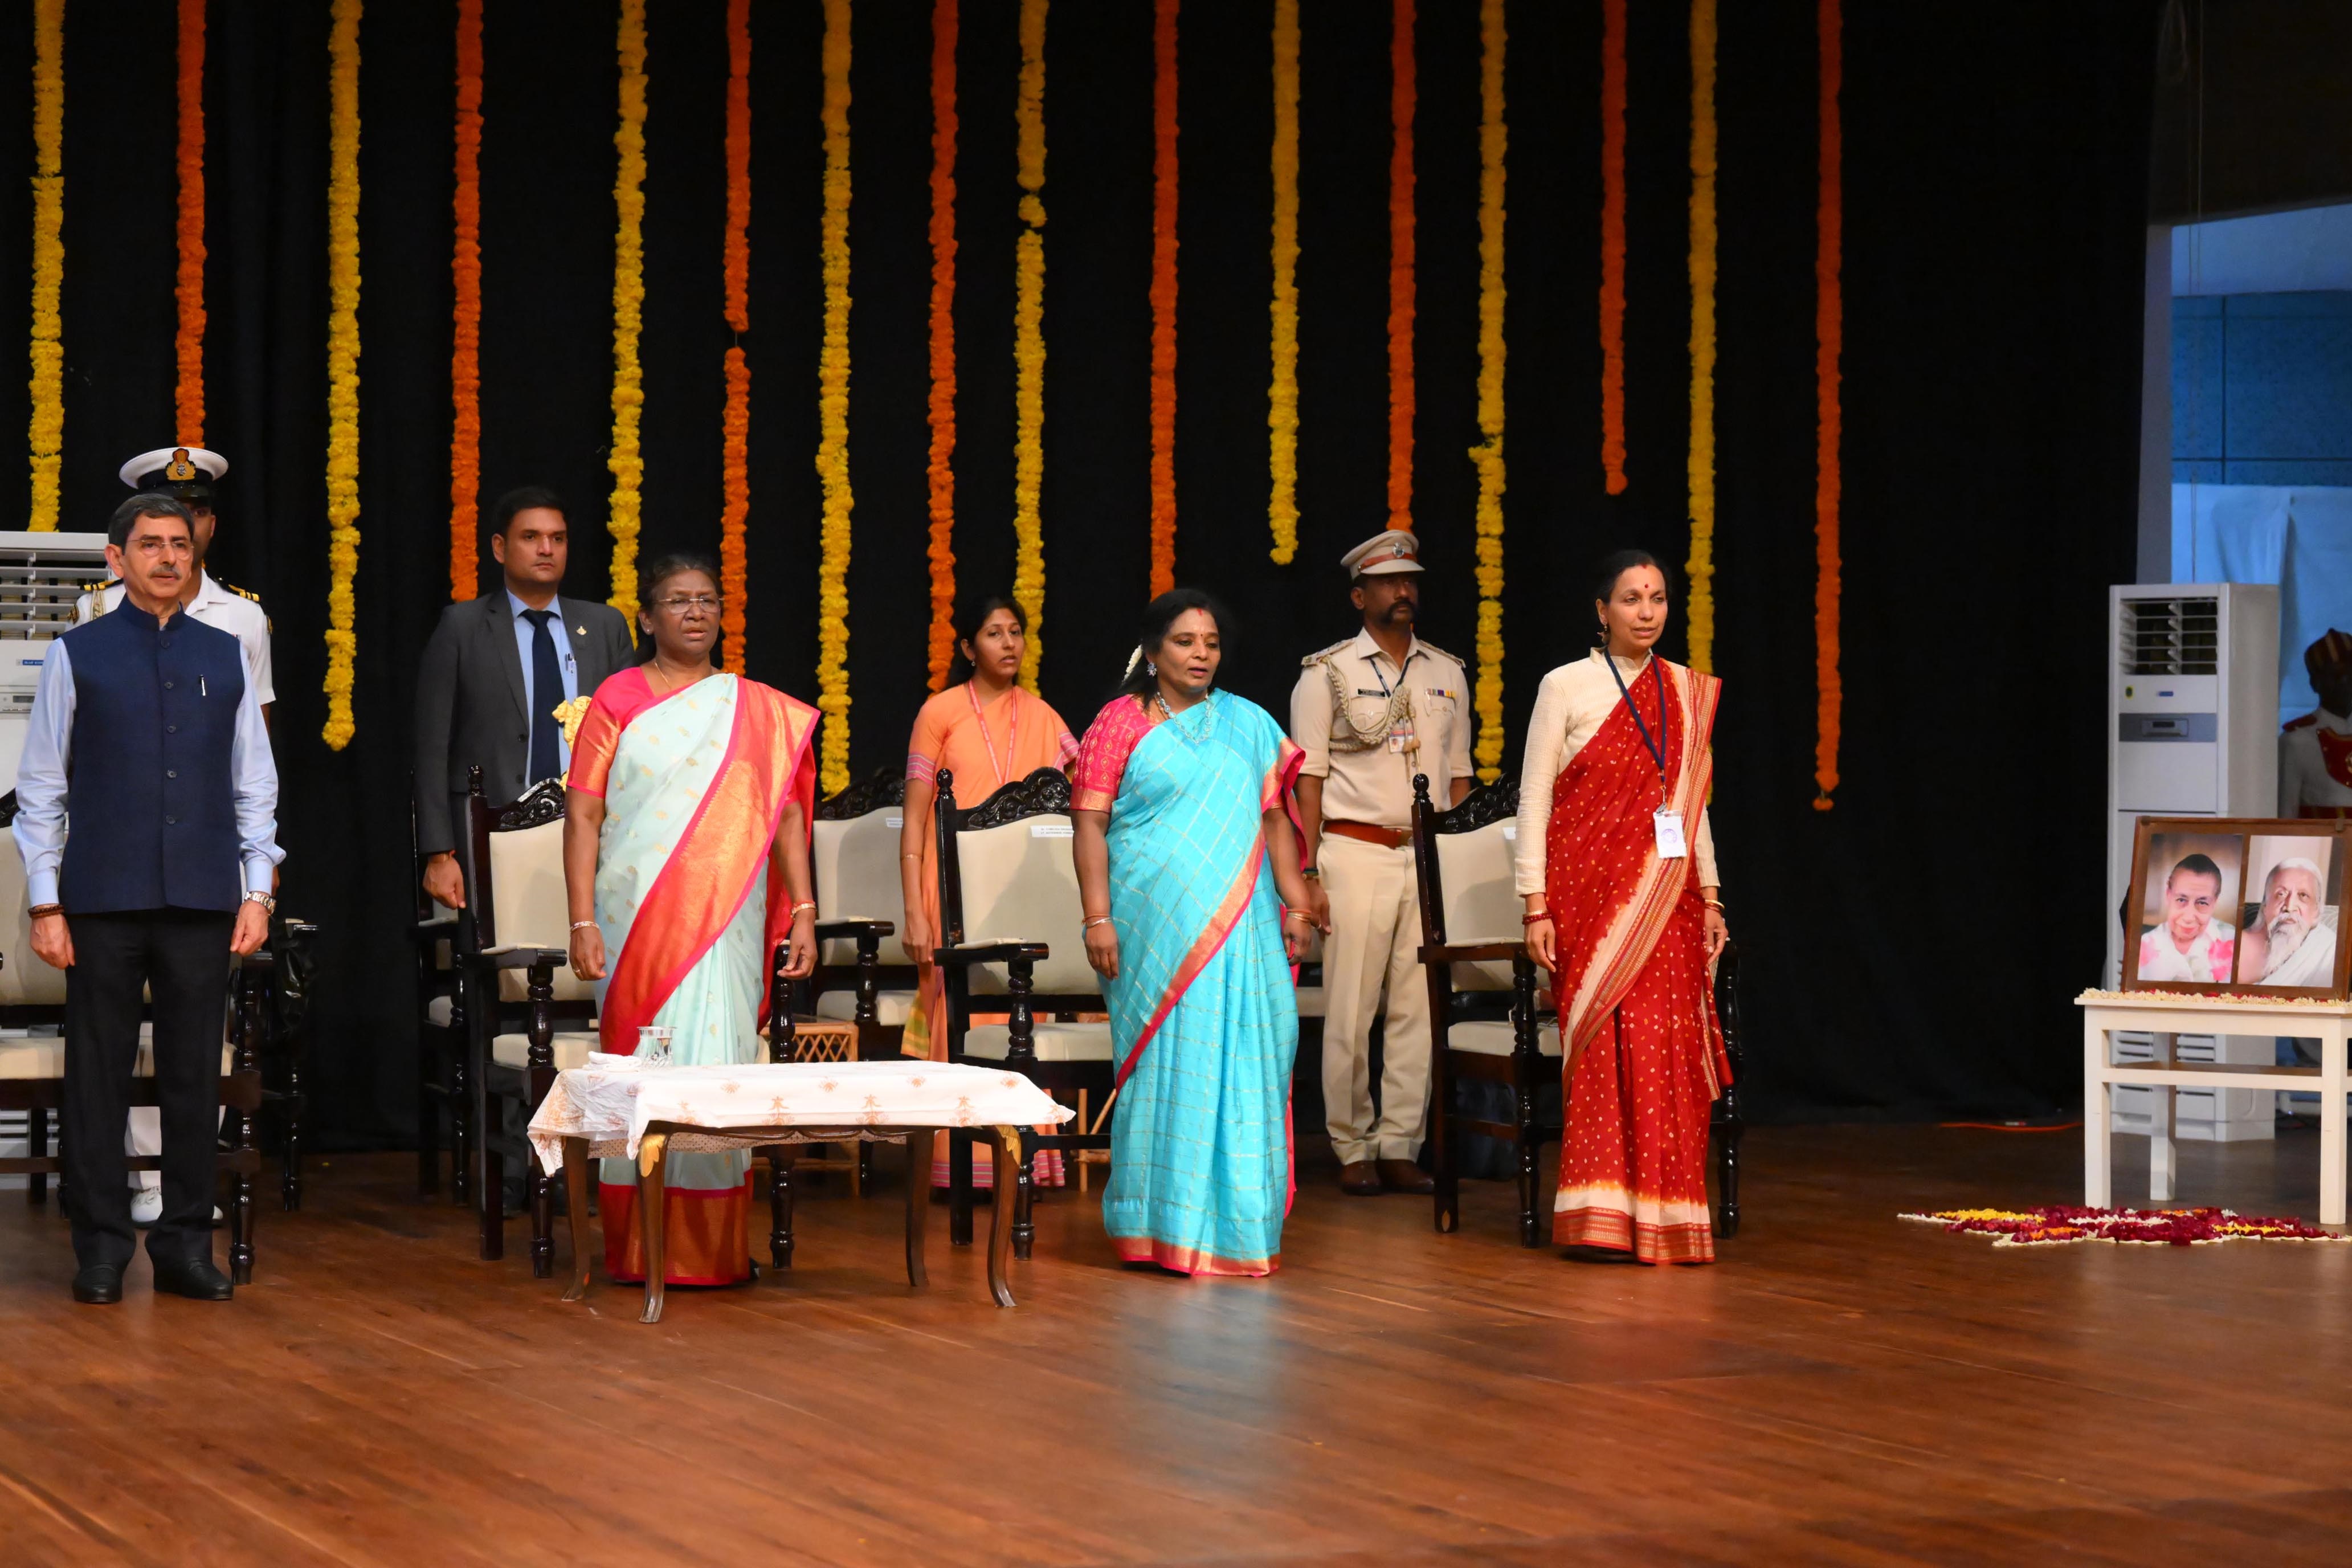 The President of India, Smt Droupadi Murmu inaugurated a conference on ‘Aspiring for Supermind in the City of Evolving Consciousness’ at Auroville on August 8, 2023.